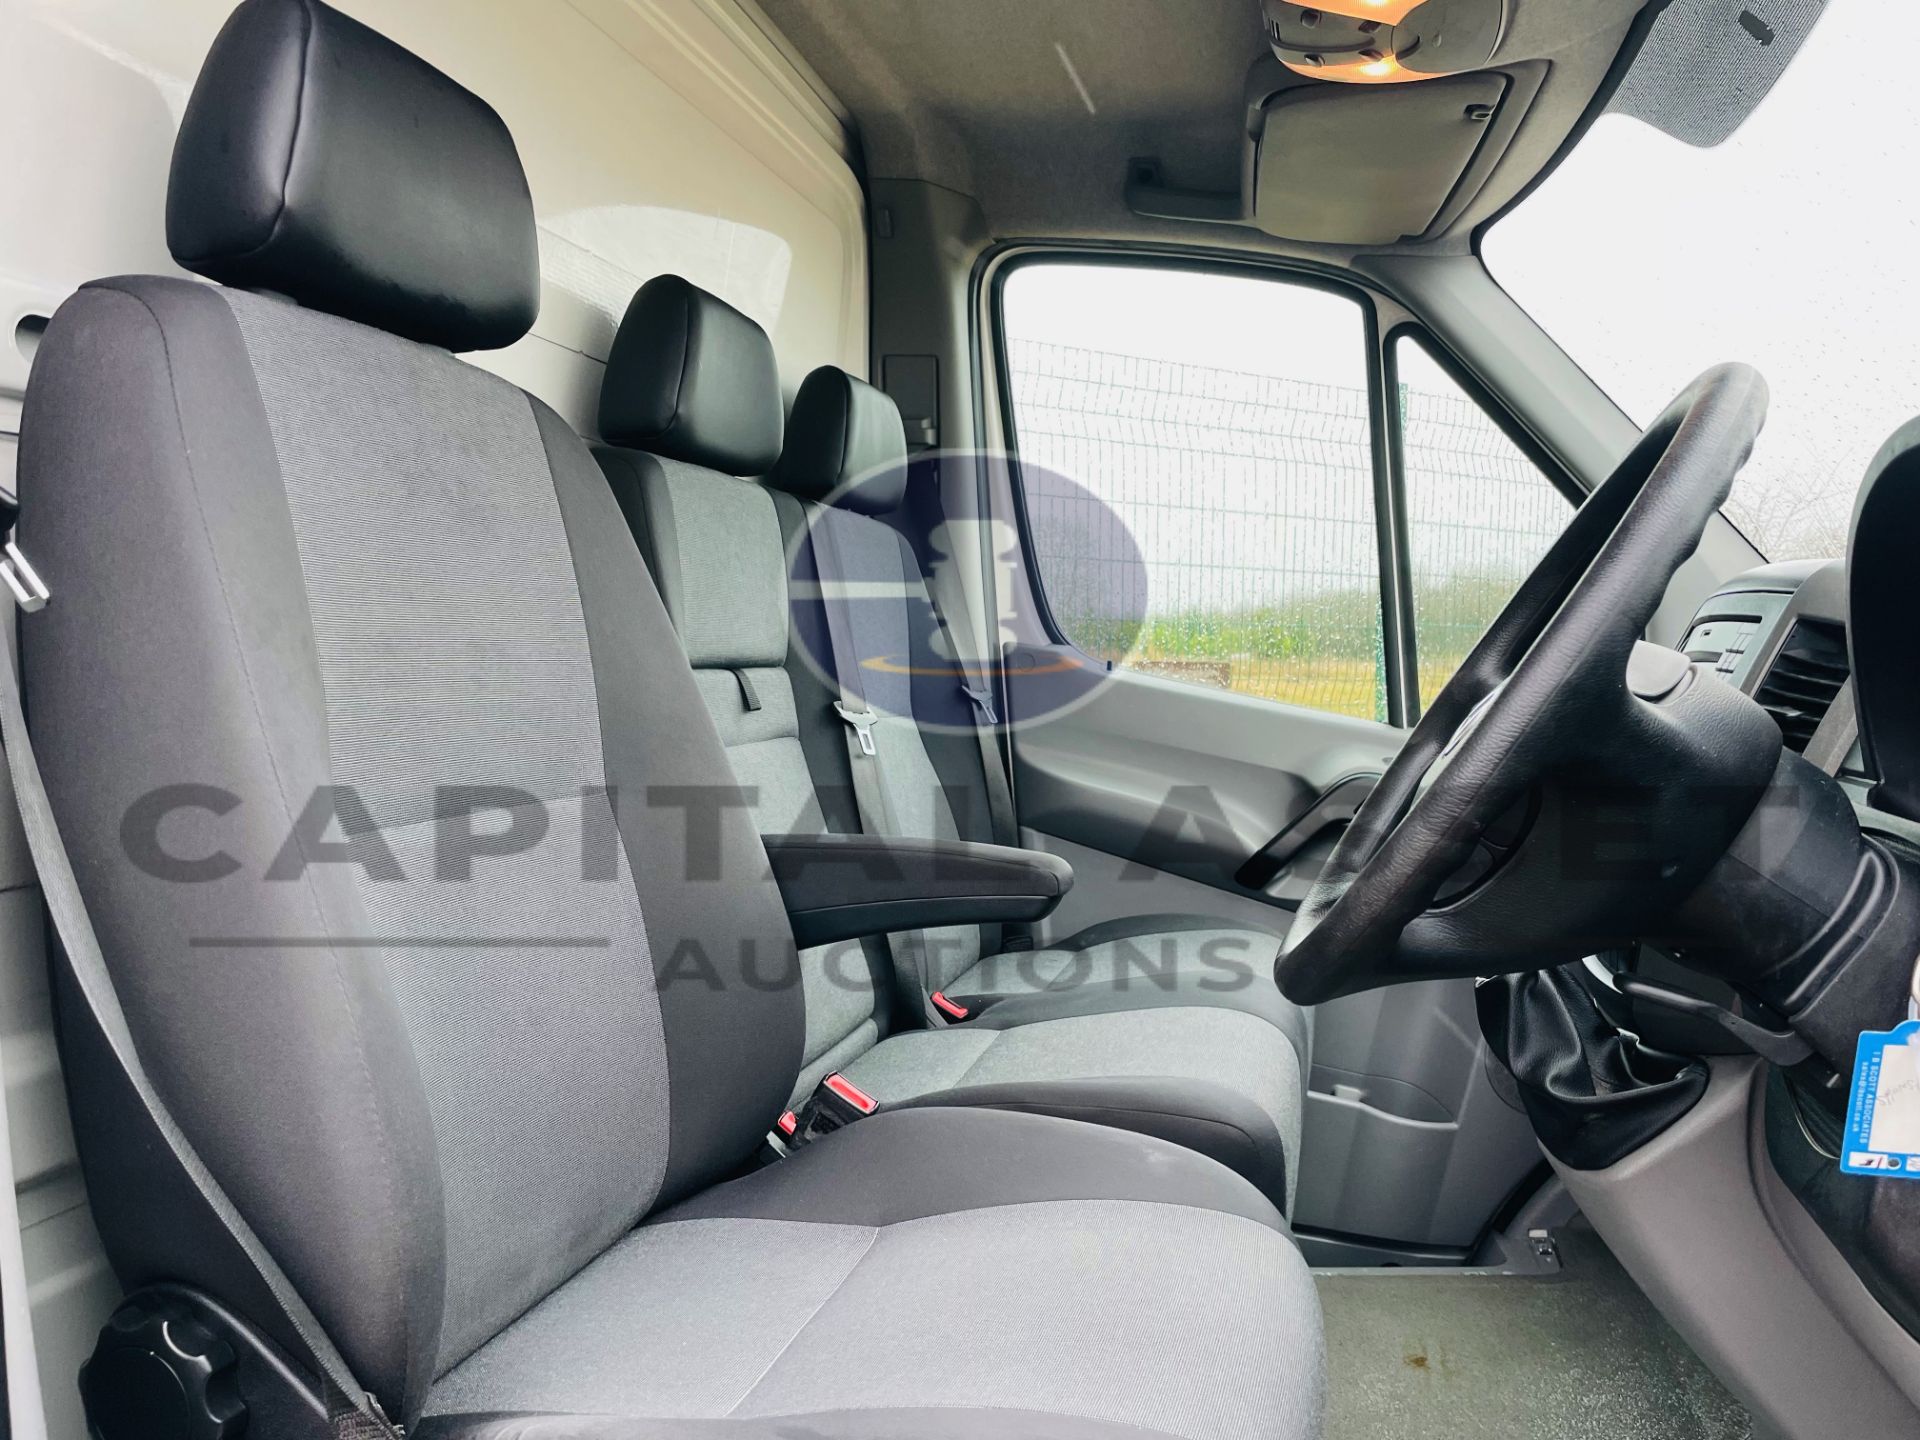 VOLKSWAGEN CRAFTER CR35 *LWB - DROPSIDE TRUCK* (2017 - EURO 6) '6 SPEED - STOP / START' - Image 23 of 39